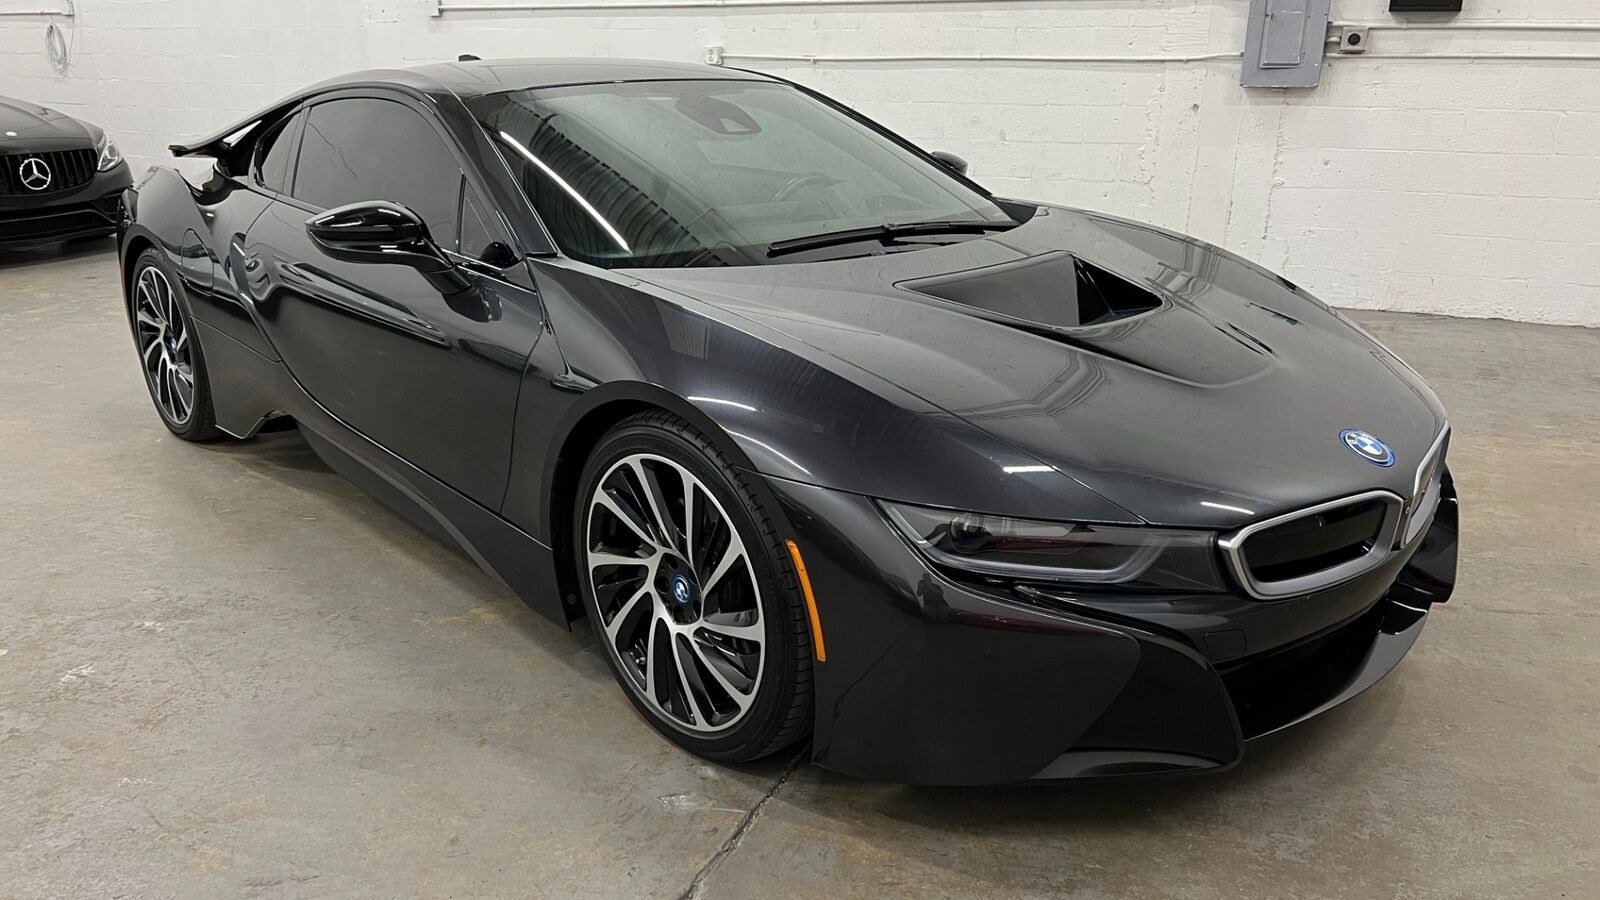 Owner 2015 BMW I8  26012 Miles, Gray 2DR 1.5L Plug-in Hybrid Turbo I3 357hp 420ft. lbs